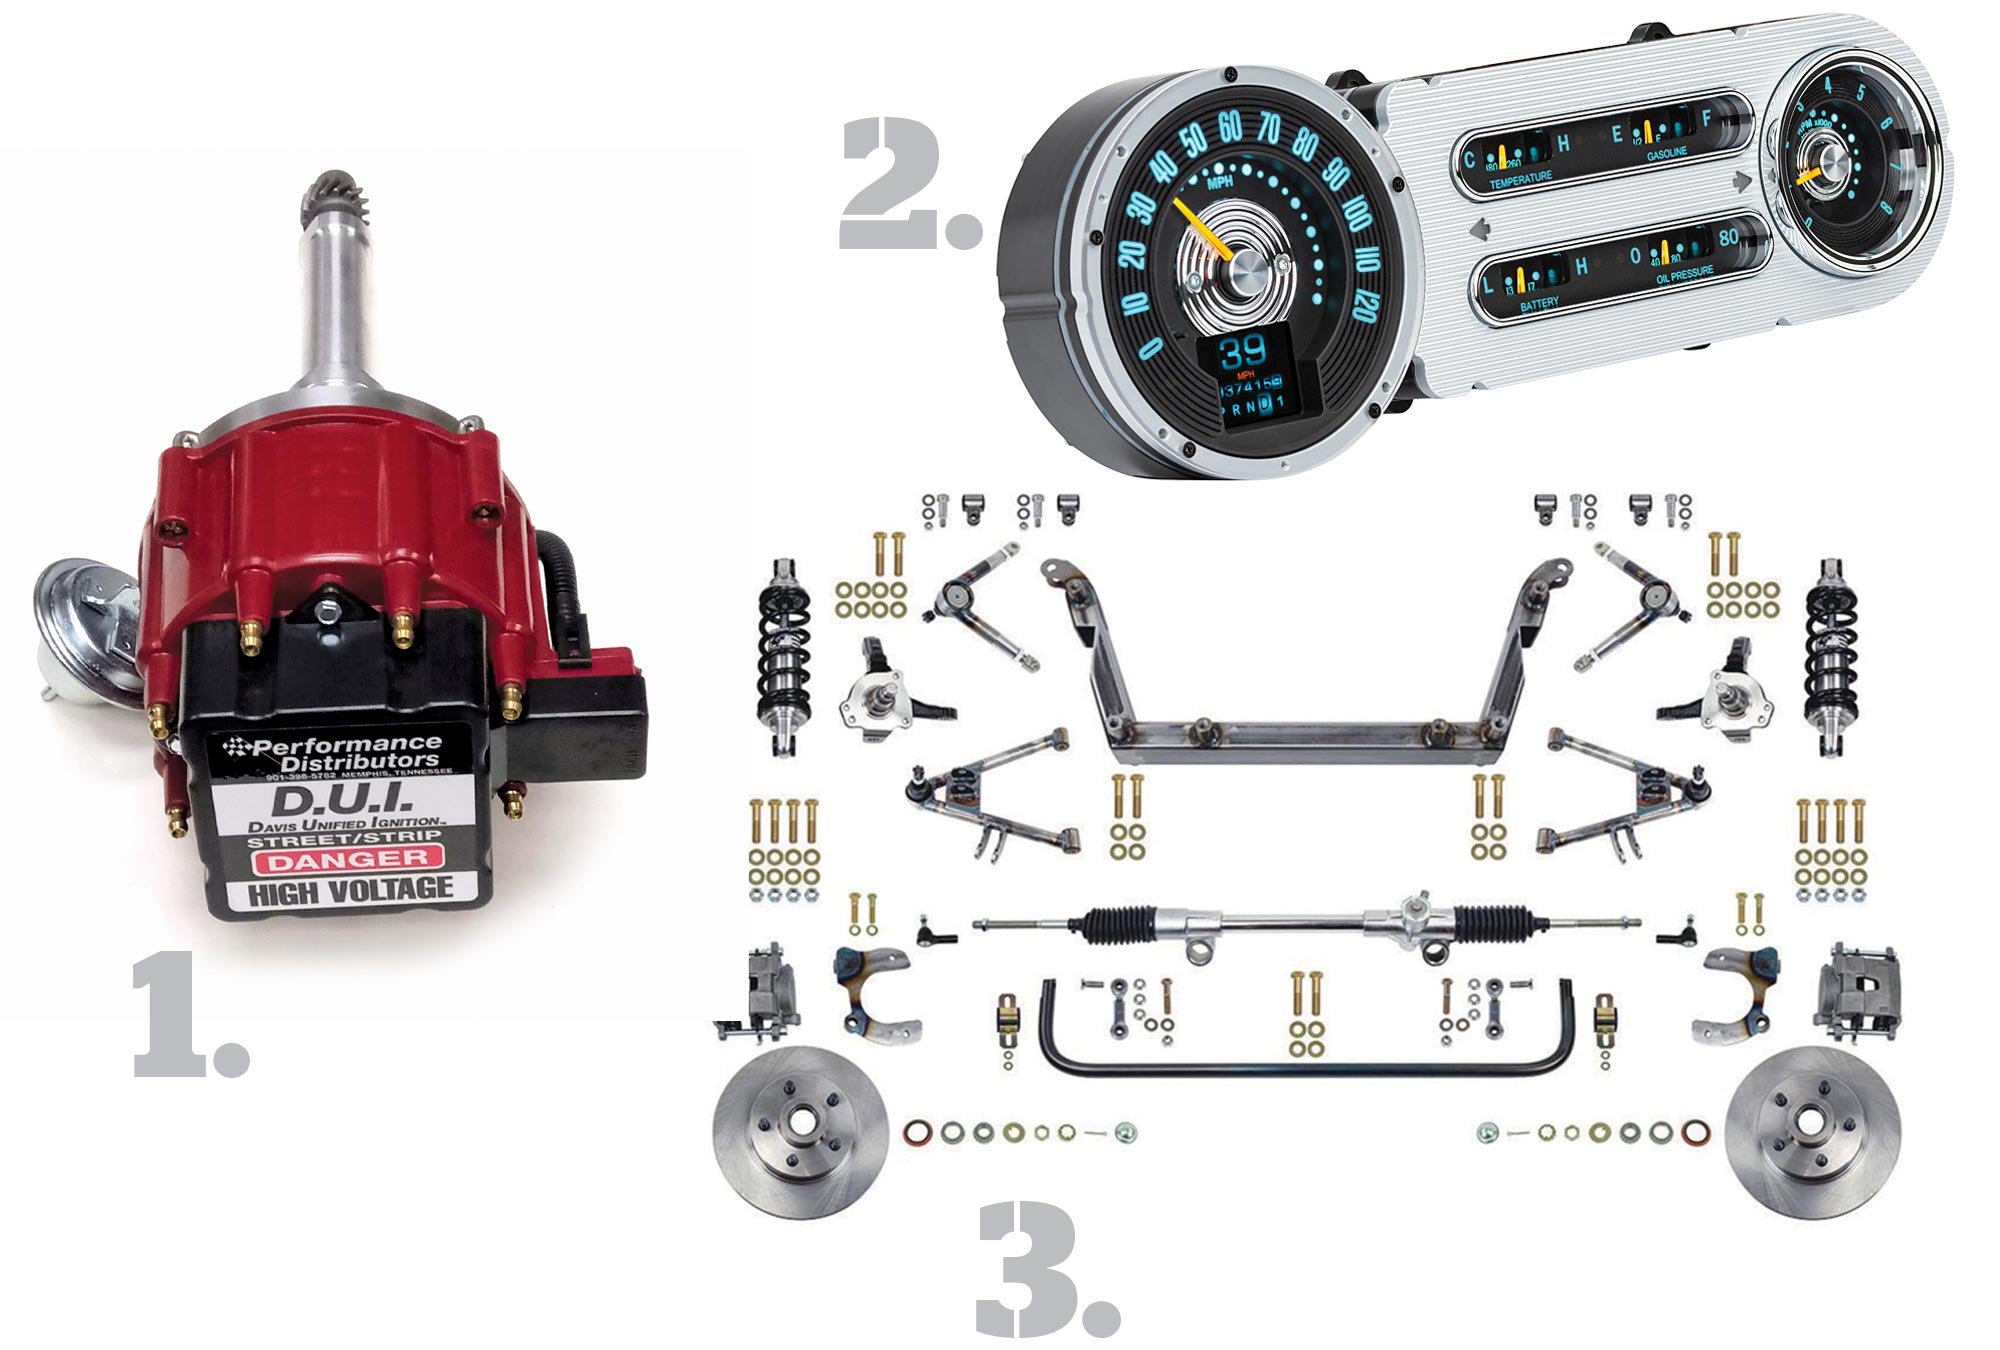 1. Vintage Caddy 429 Distributor; 2. OEM Look With Modern Gauge Performance; 3. Build Your Own IFS